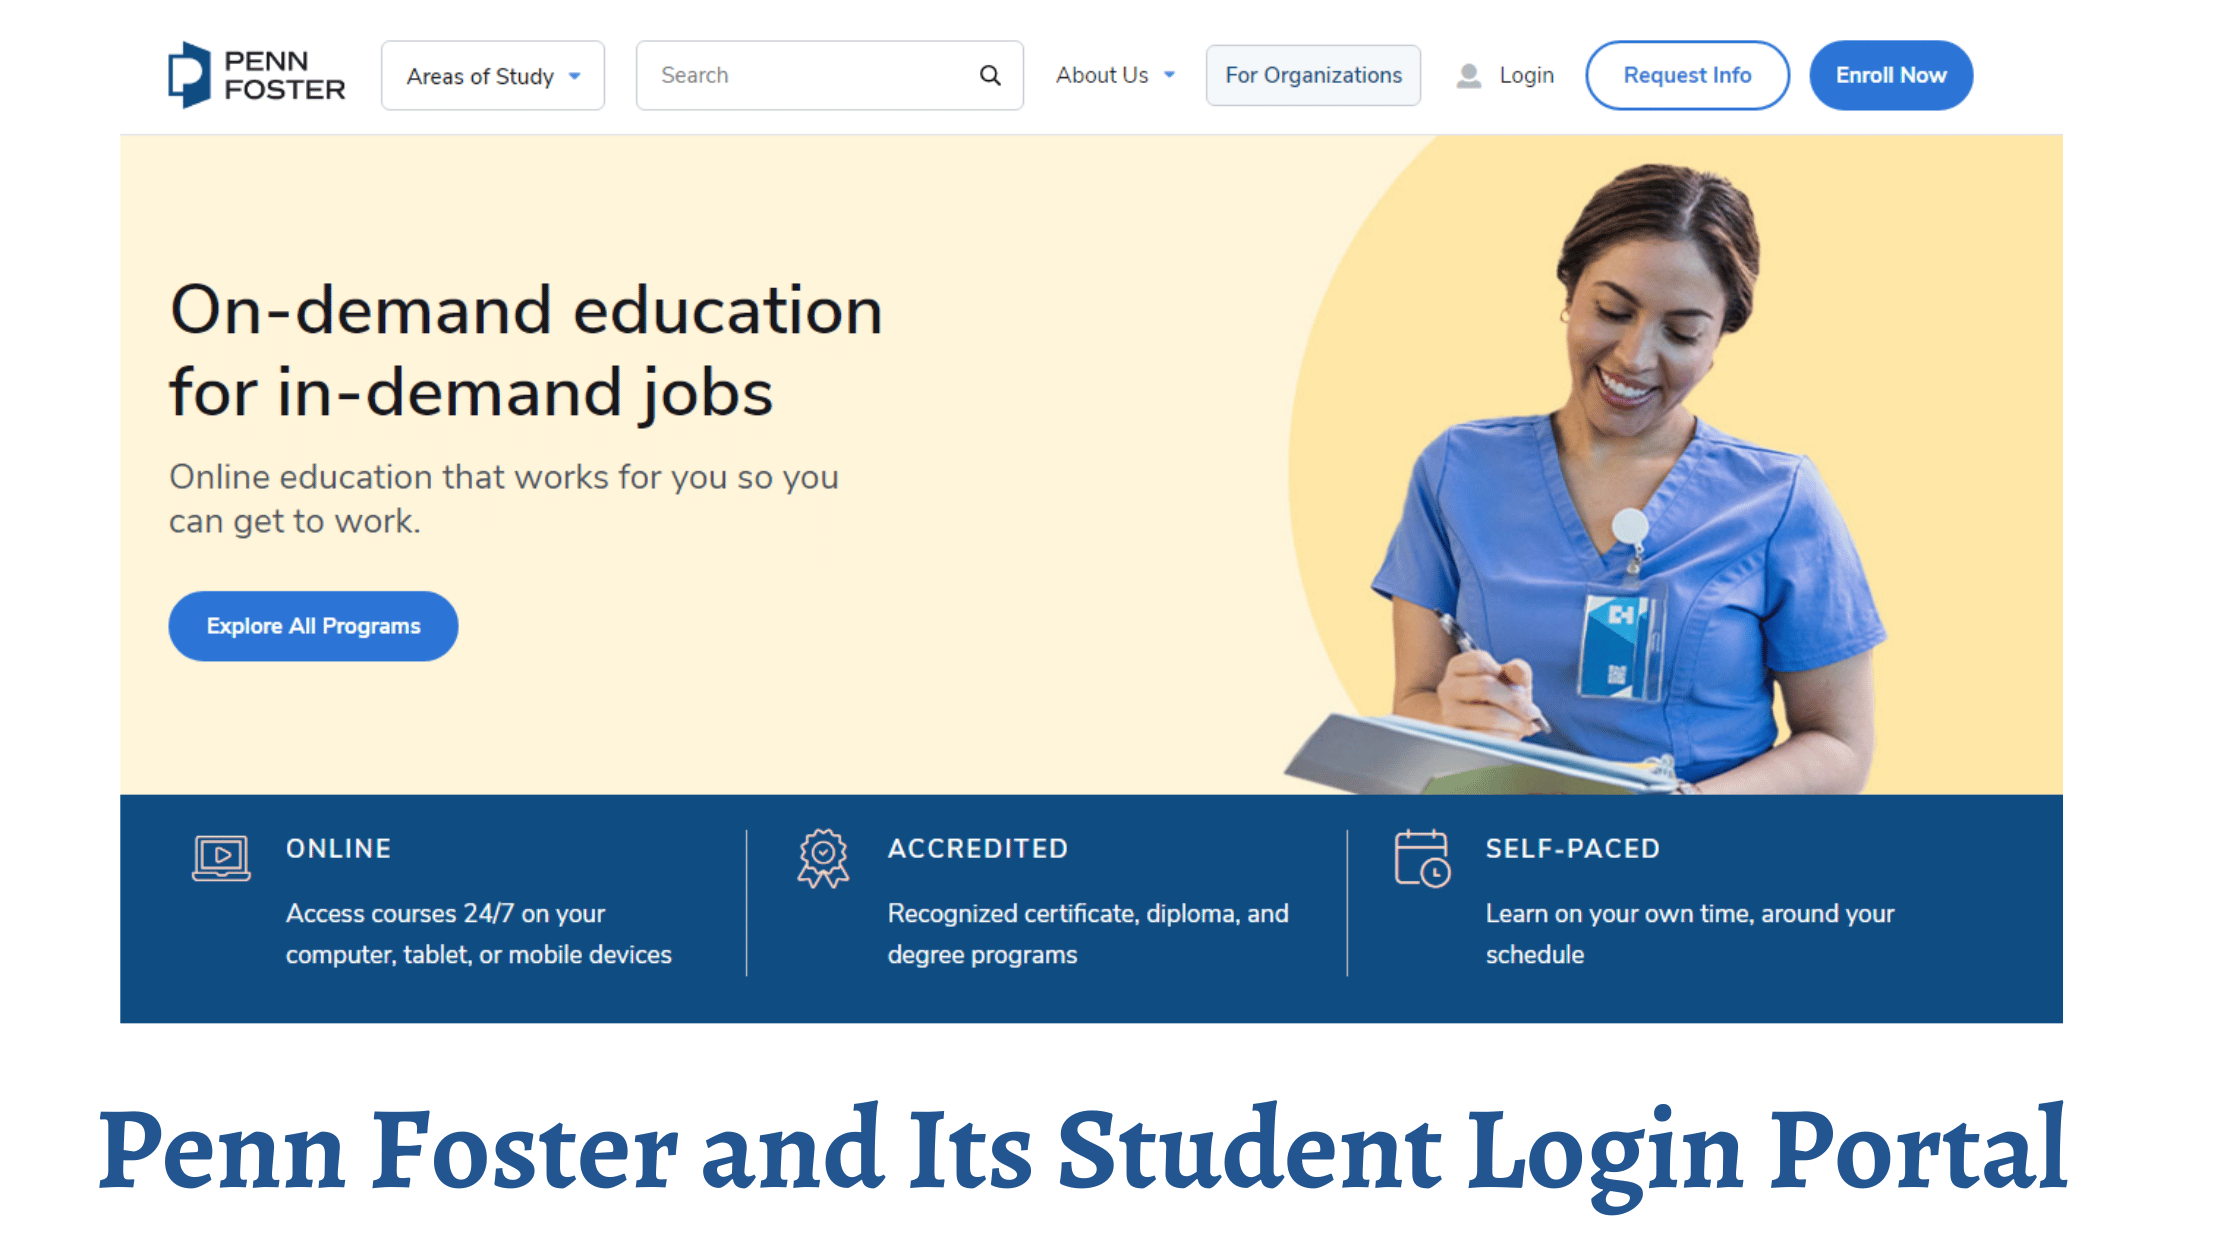 How to Login to the Penn Foster Student Account